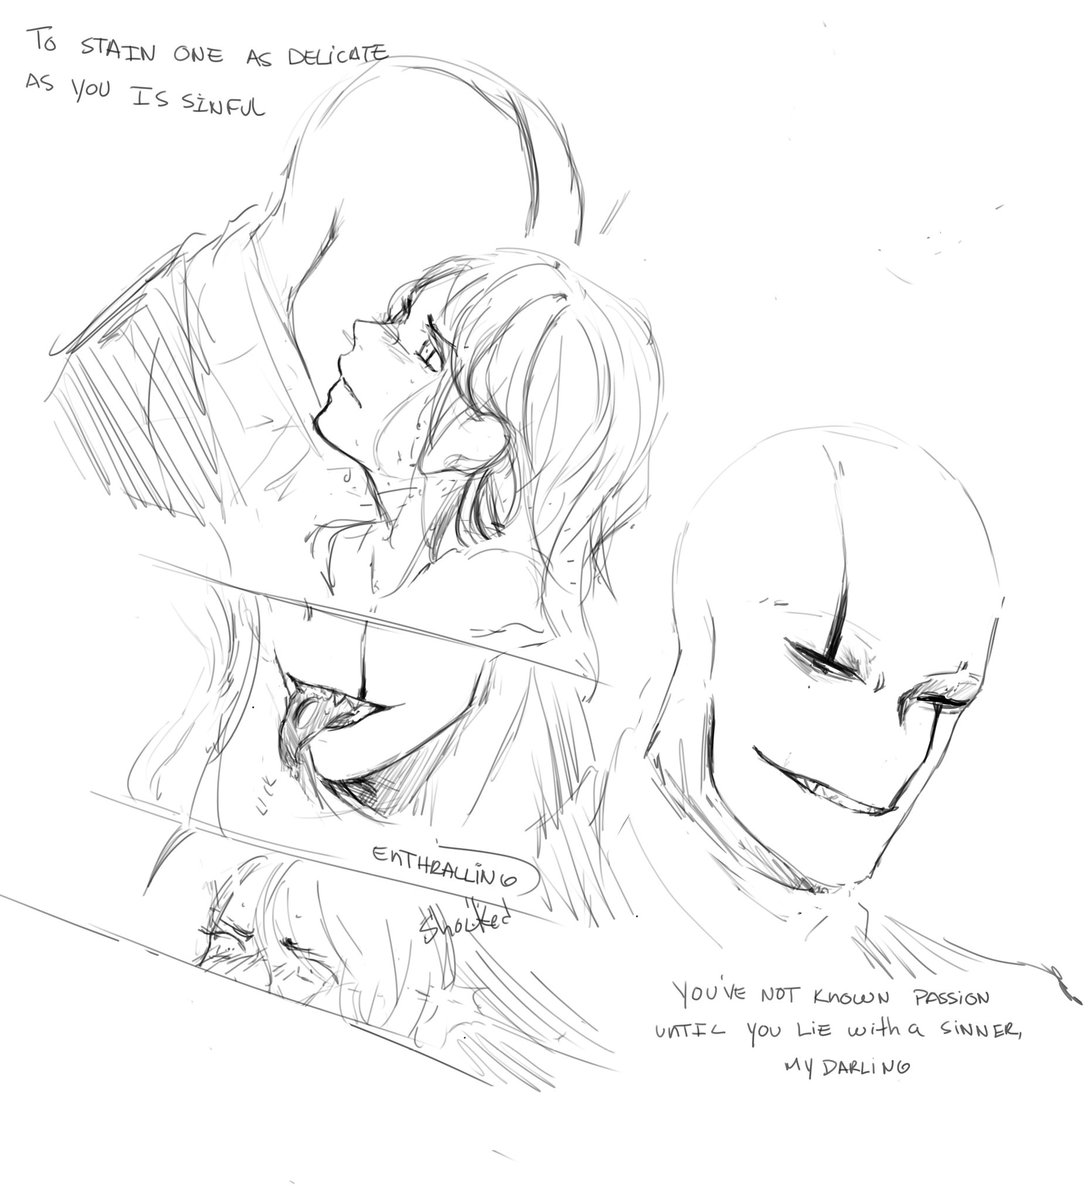 I CANT BELIEVE IT BRO. AFTER A COUPLE OF PAINFUL YEARS OF HIATUS SHE IS FINISHIN THIS FIC. The reason why i fell for Gaster so fuckin hard. This fic was my obsession for a while. I'm glad she is back!!
Linving with a Litch is finally having a closure. An old doodle fams 